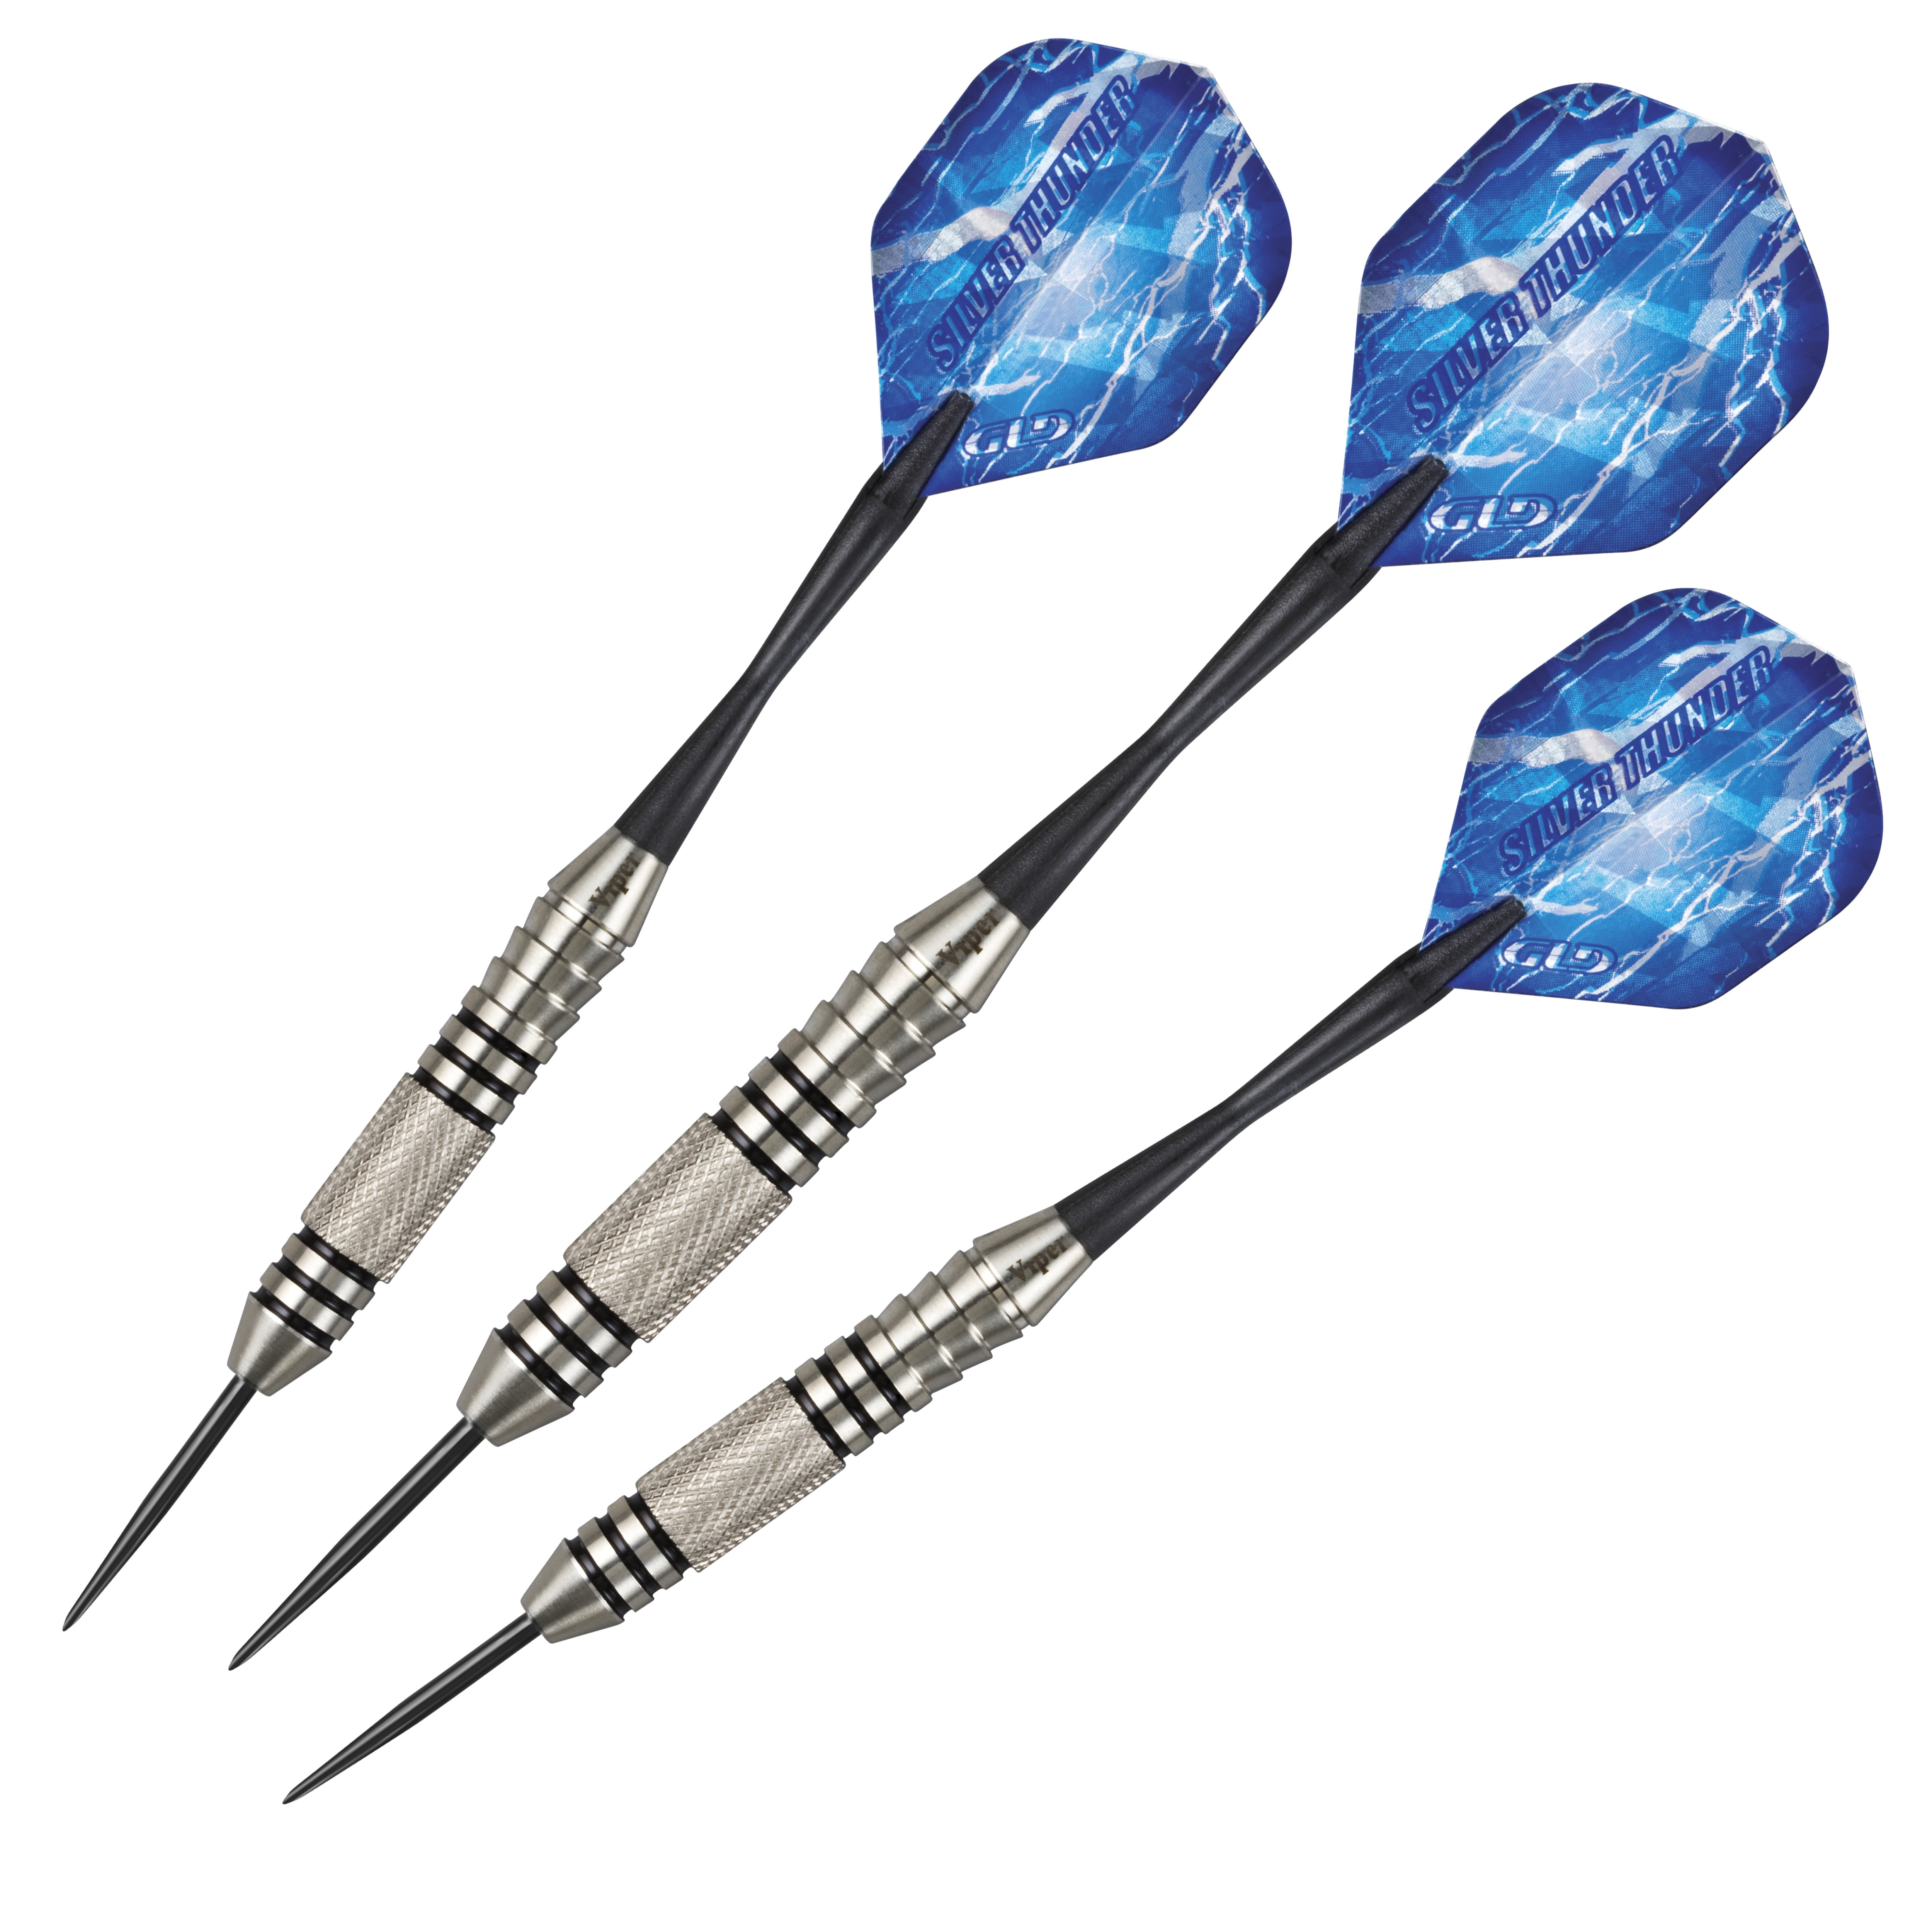 FAST & FREE Viper Laser Throw Toe Line Marker Steel and Soft Tip Darts ? 